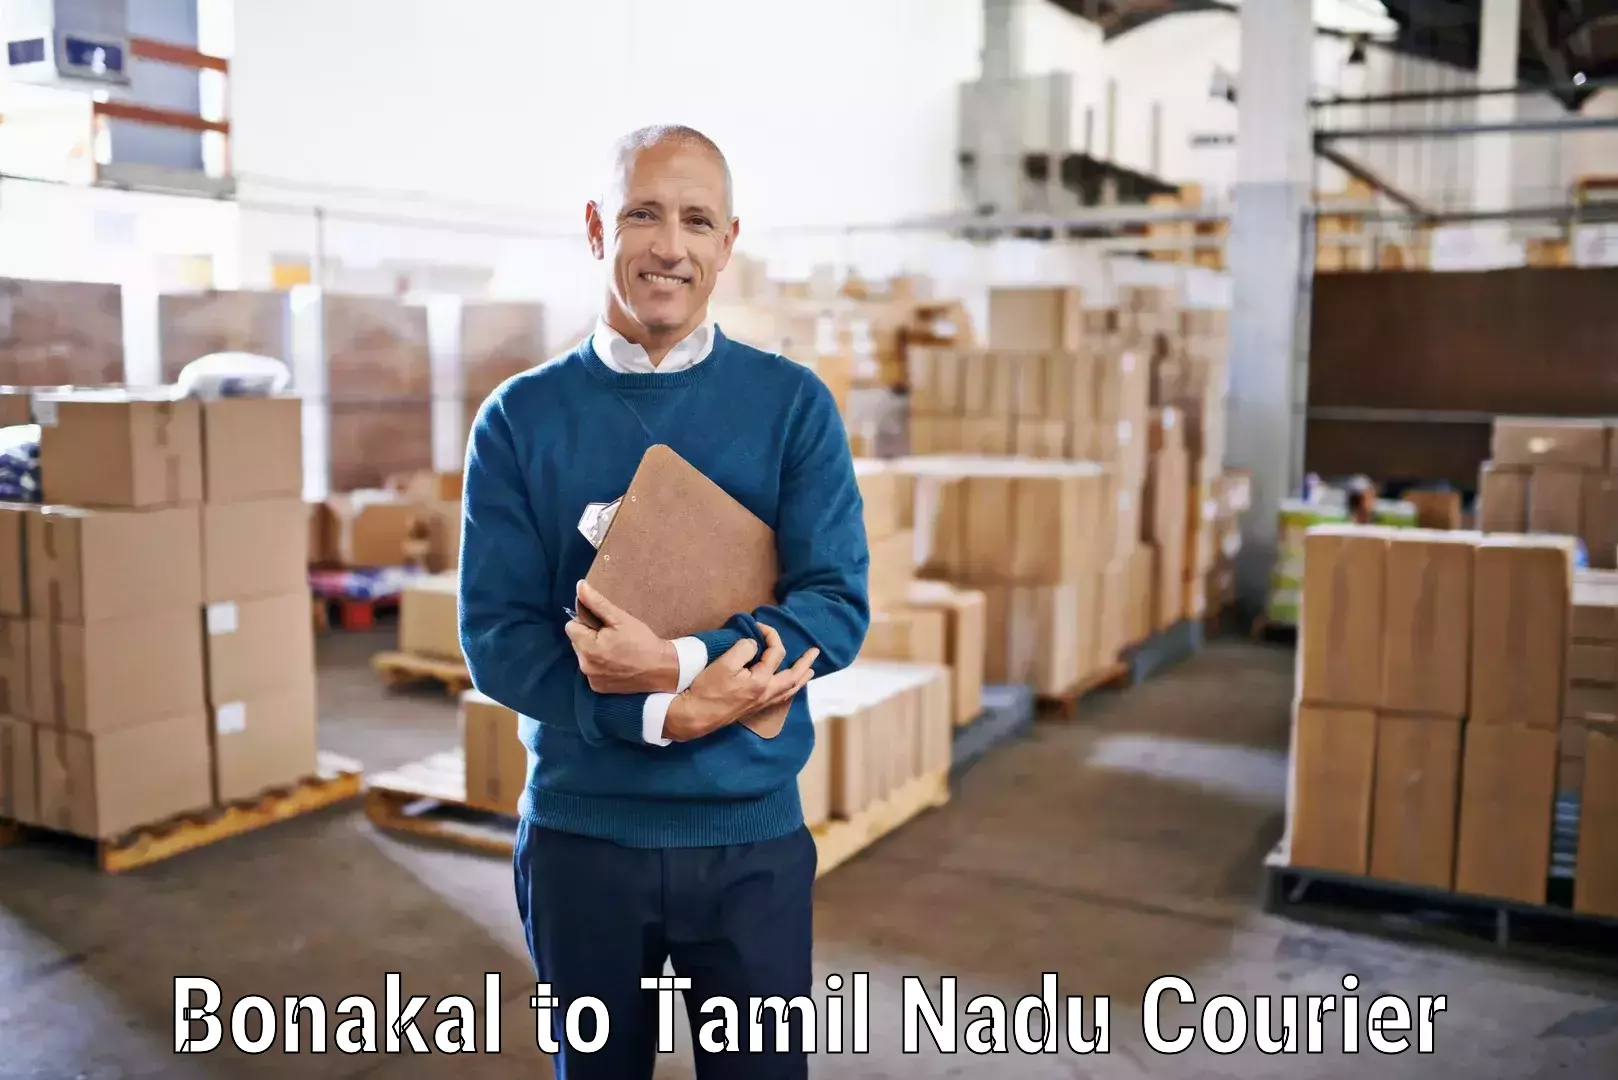 Courier service innovation Bonakal to Thanjavur